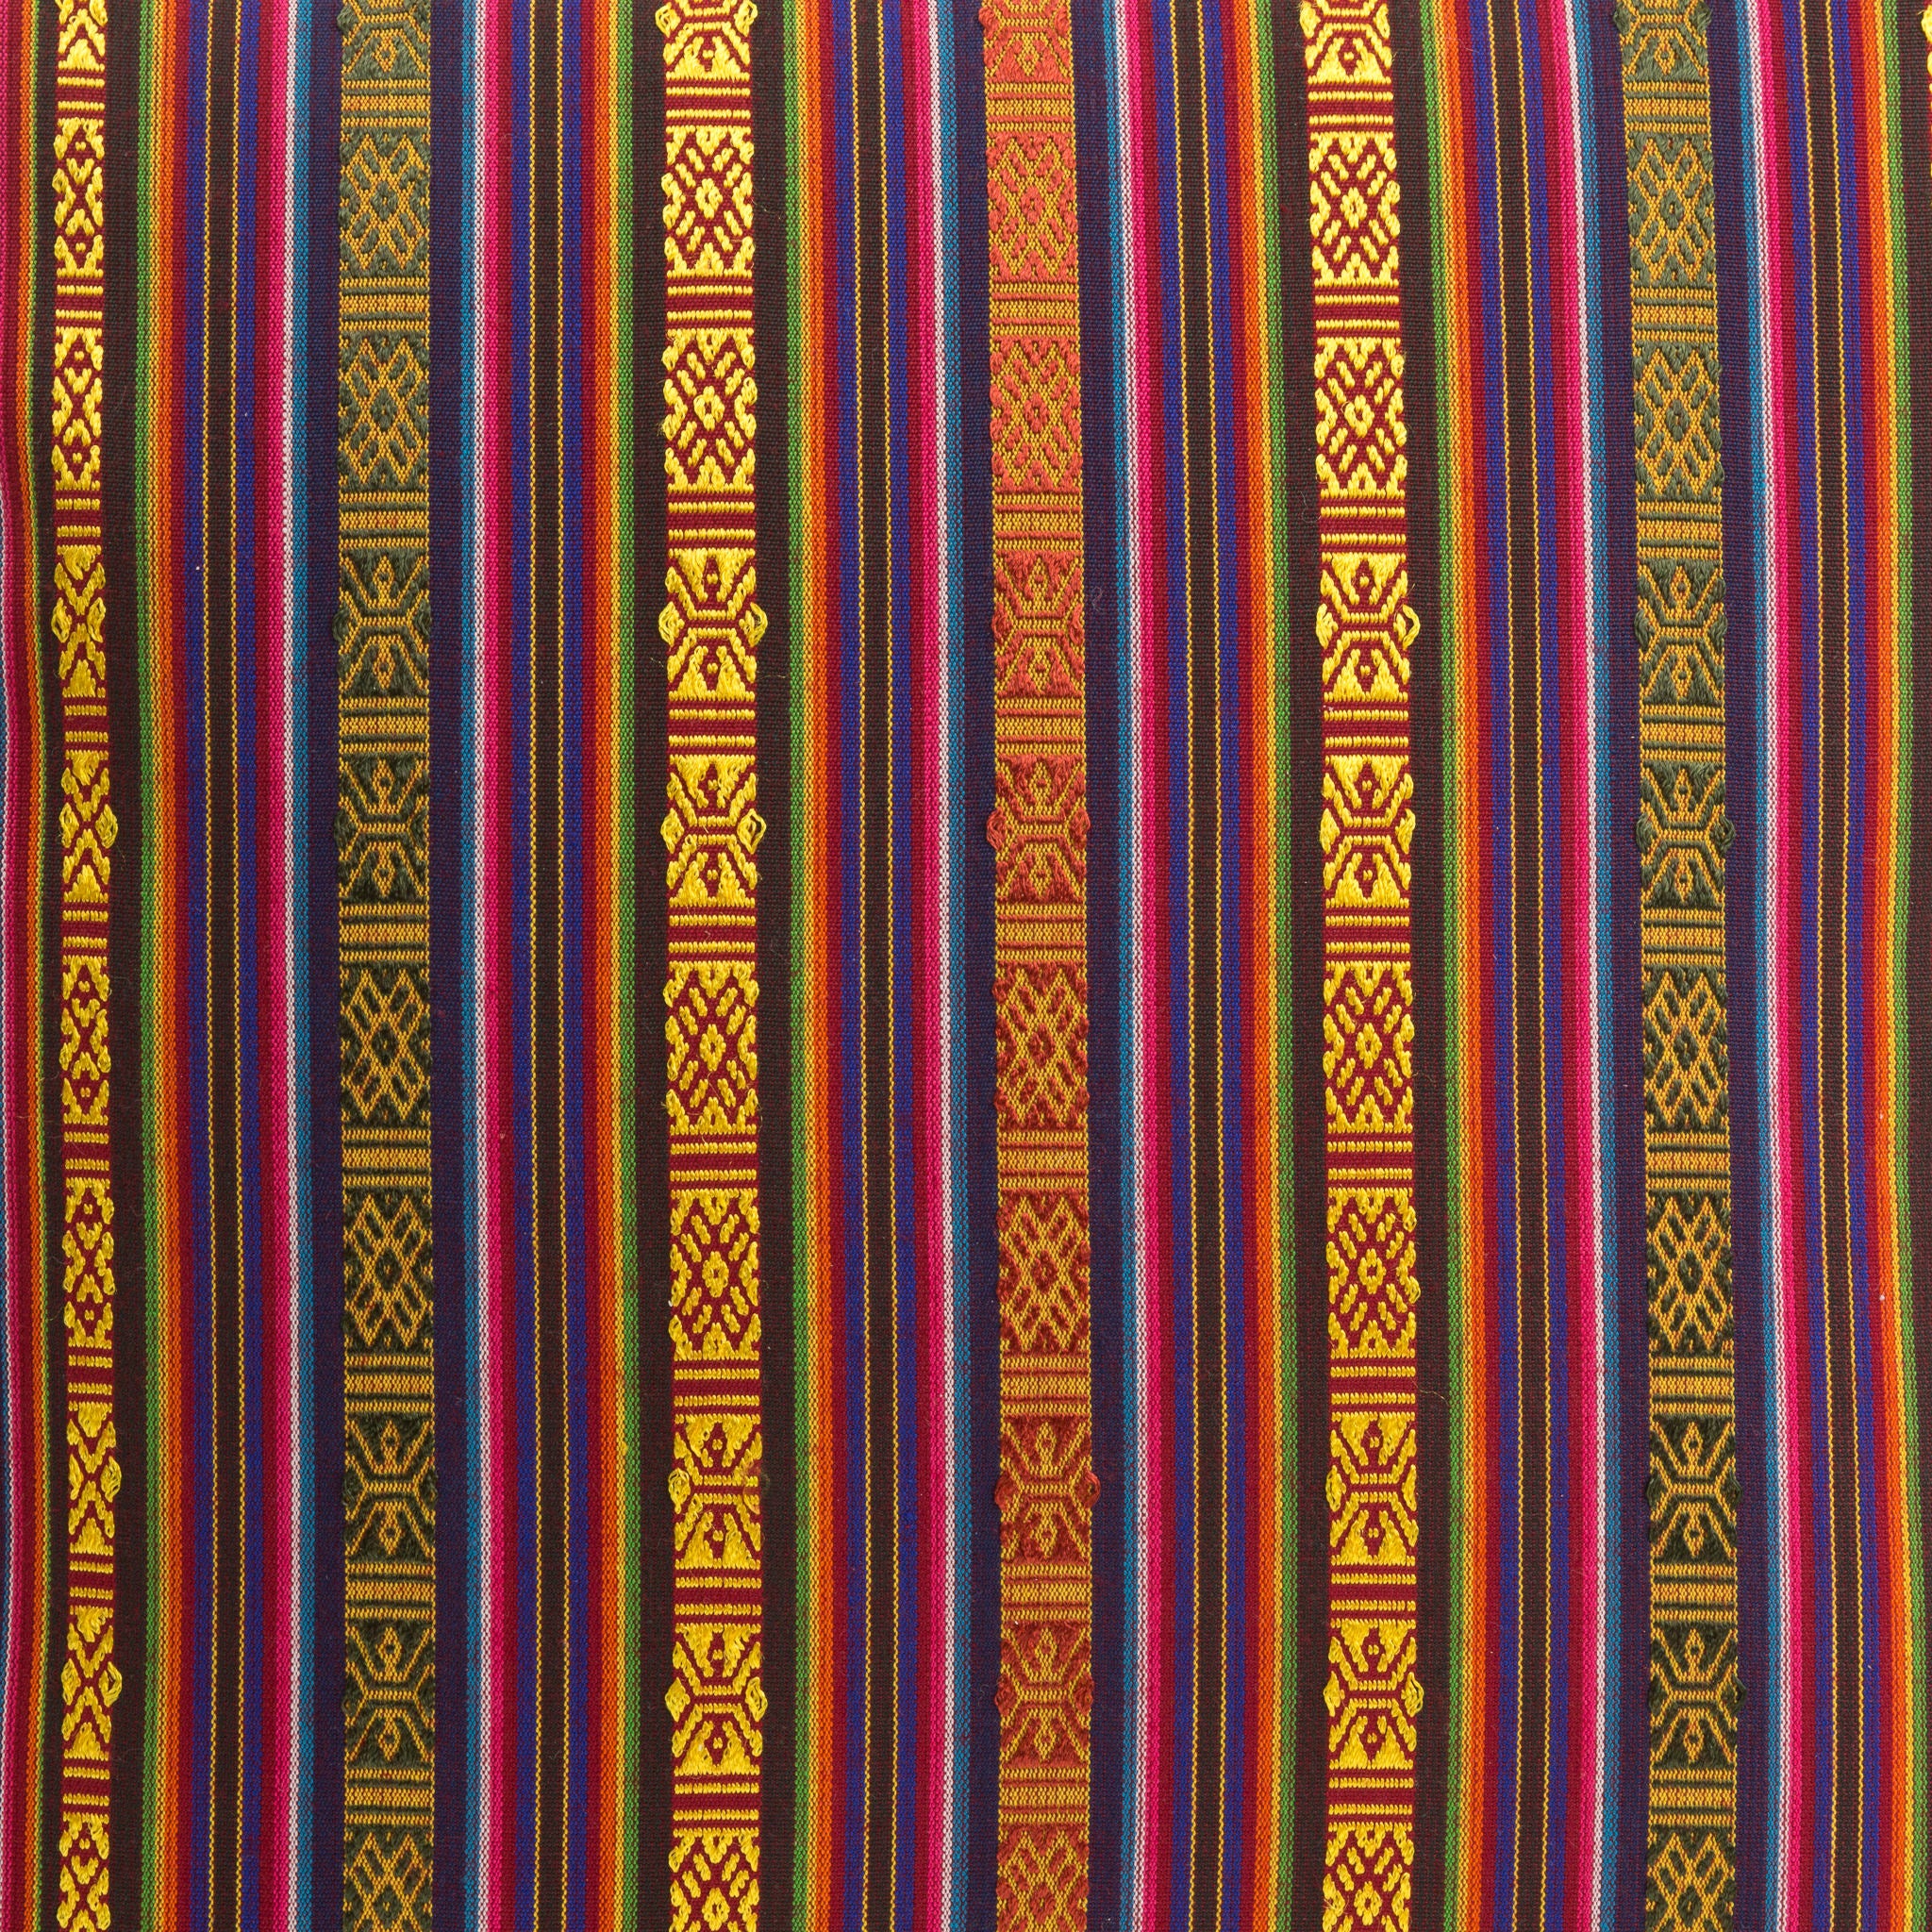 Gold, Burgundy Red and Blue Striped Handwoven Scatter Square Cushion from Bhutan - DETAIL